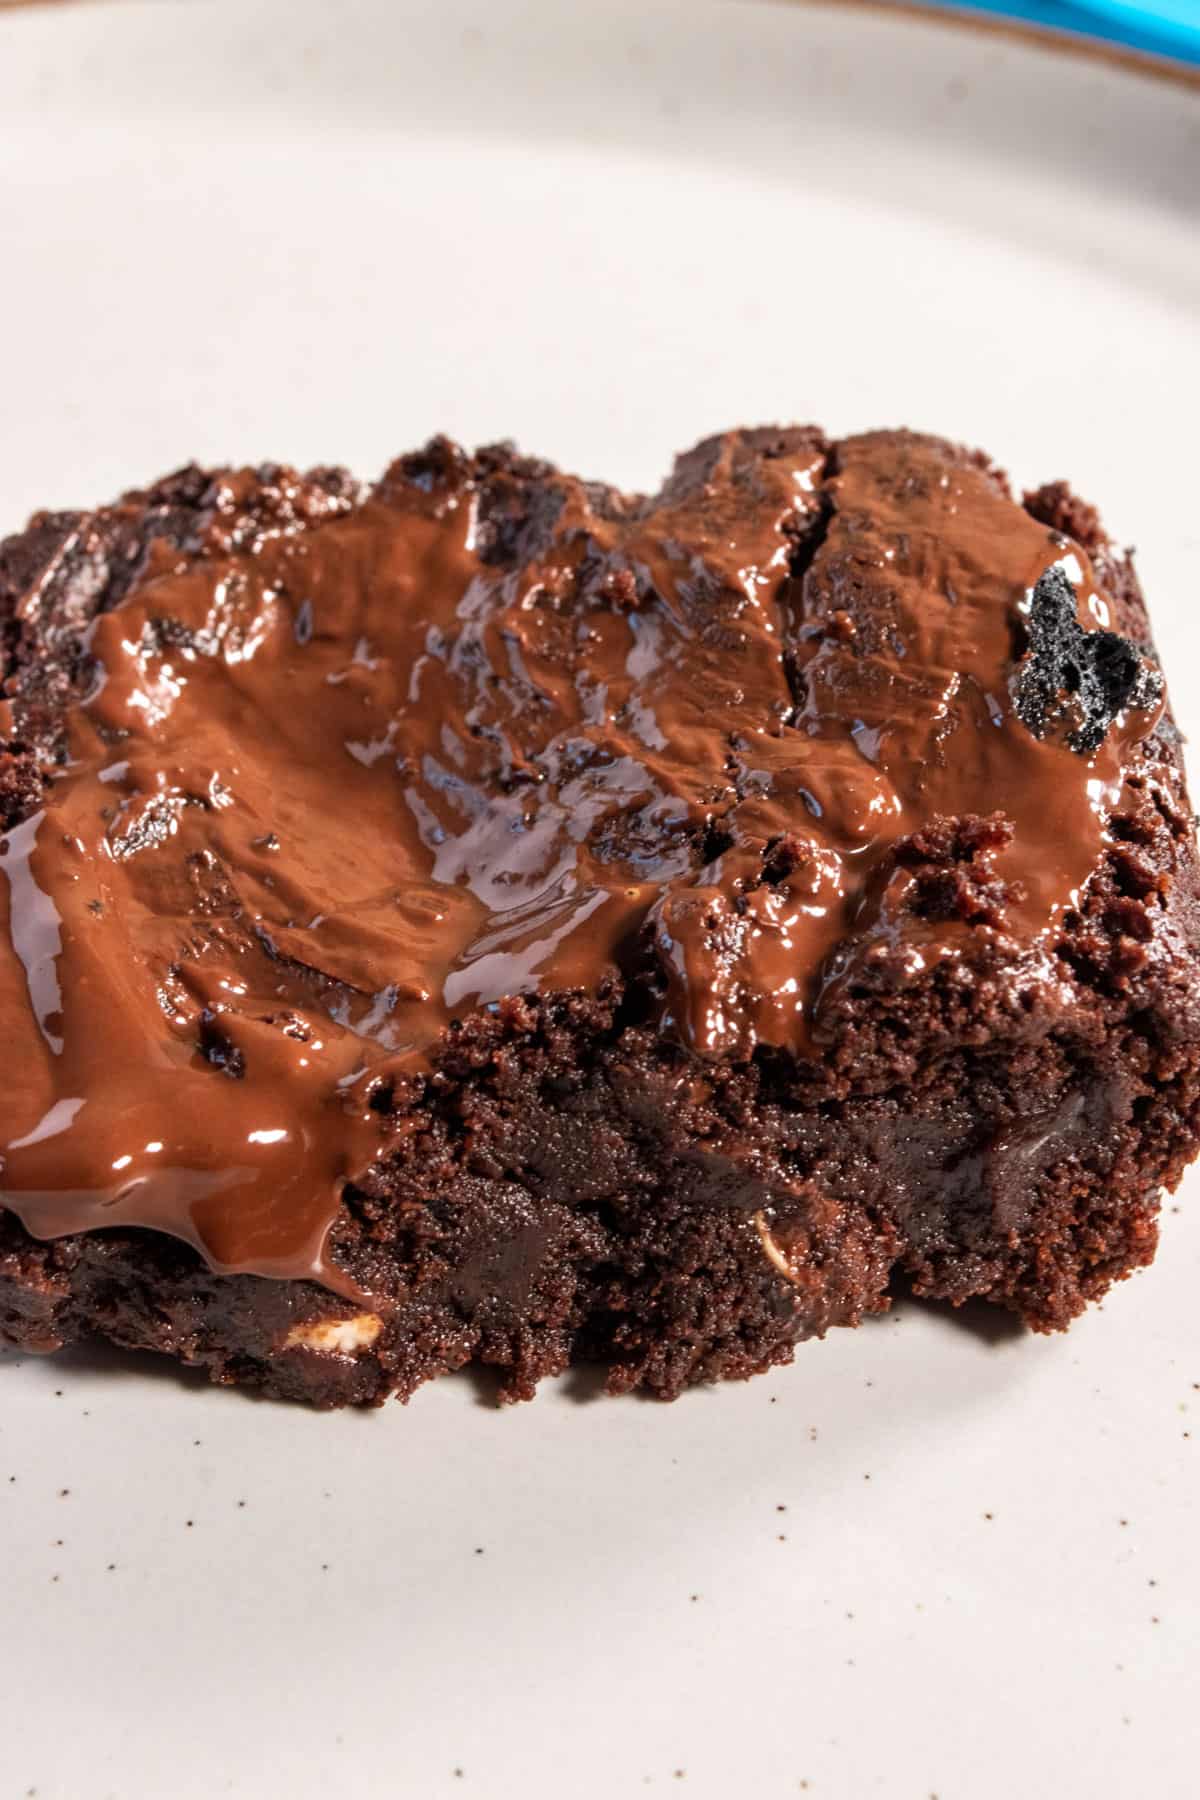 An overhead shot showing a fudgy slice of brownie. Chocolate drips down the side.